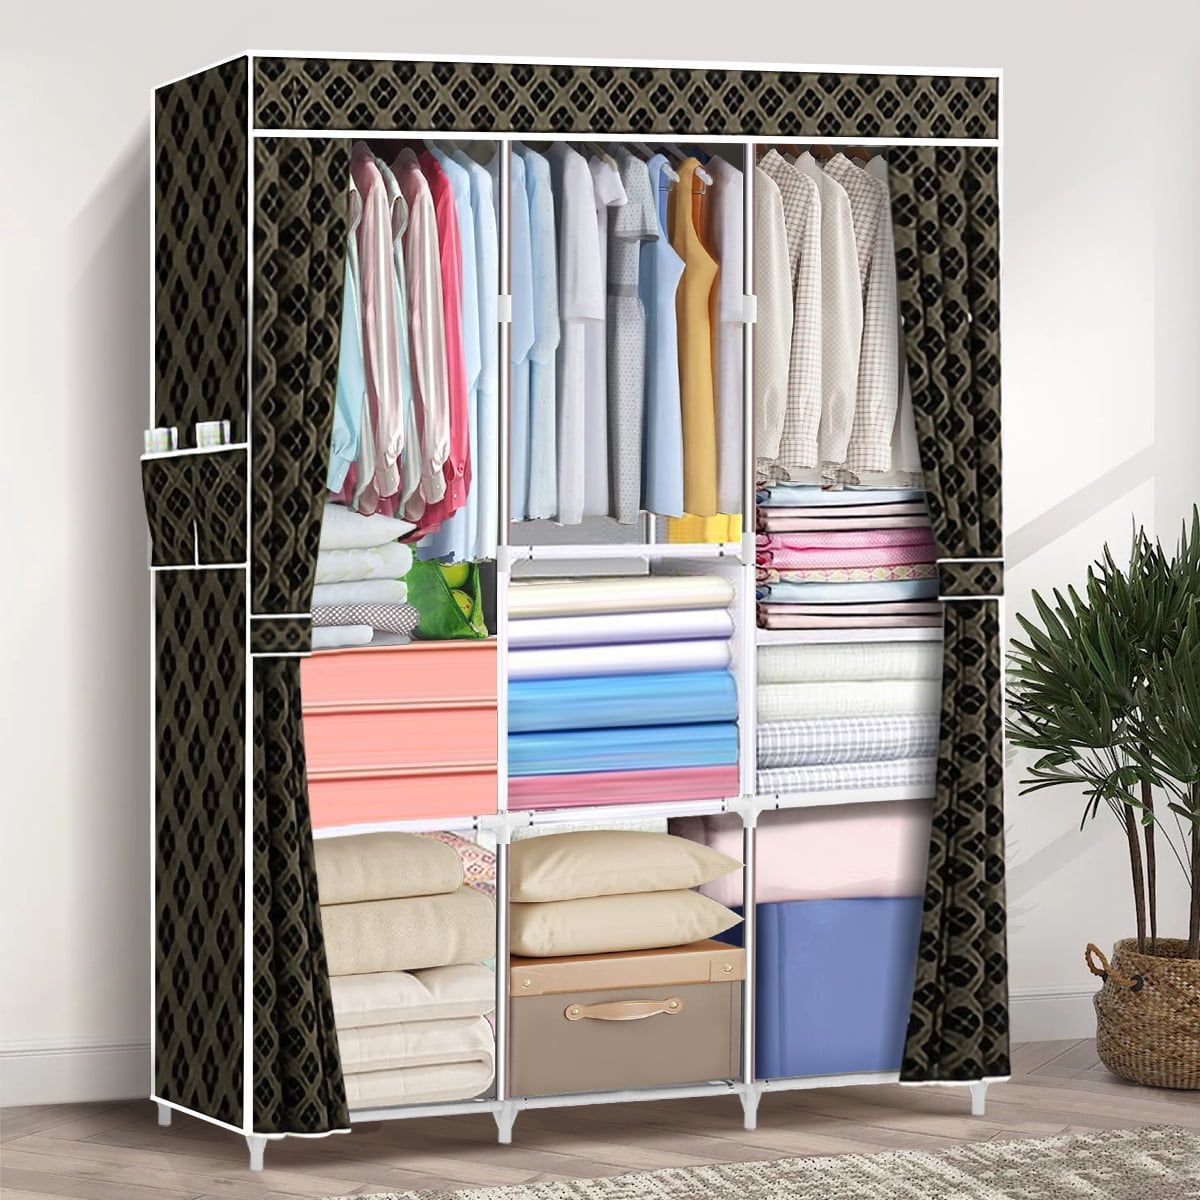 Closet Organizer With 3 Hanging Rod 65*41 Inch Clothes Rack With 7 Shelves, Portable  Closet With Waterproof Cover, Wardrobe Clothes Storage Organizer For  Bedroom – Walmart Inside Wardrobes With Shelf Portable Closet (View 7 of 20)